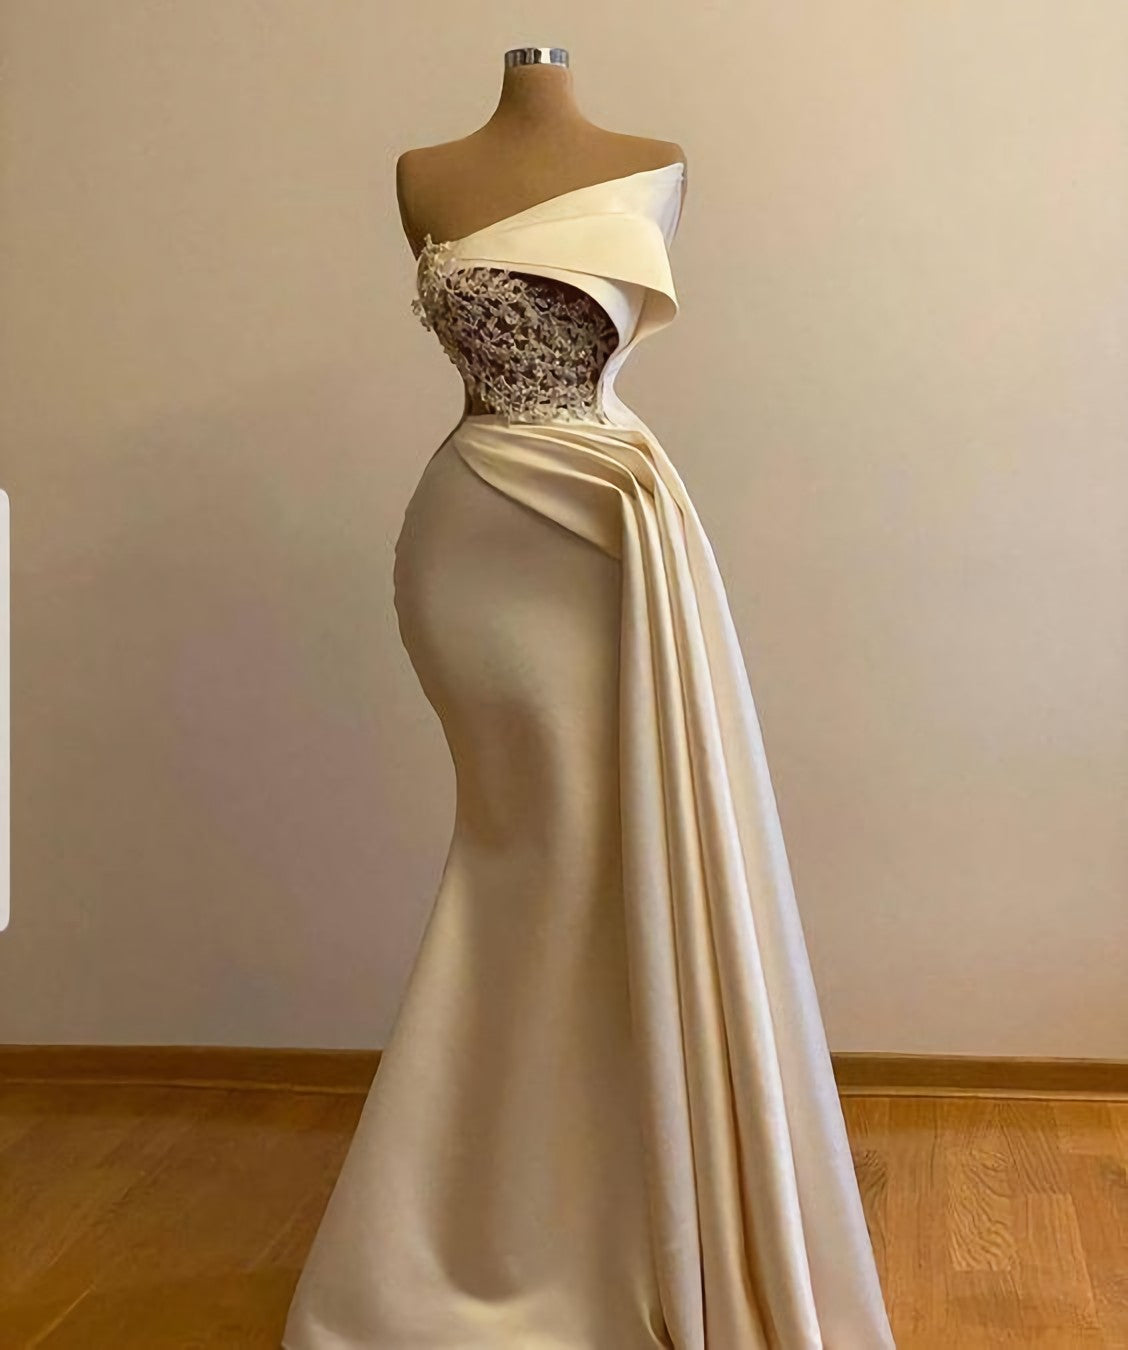 Wedding Dresses Inspo, Off Shoulder Ivory Prom Dress, With Cape Wedding Gown Bridal Dress, Long Ivory Engagement Dress, African Clothing For Women Prom Dress